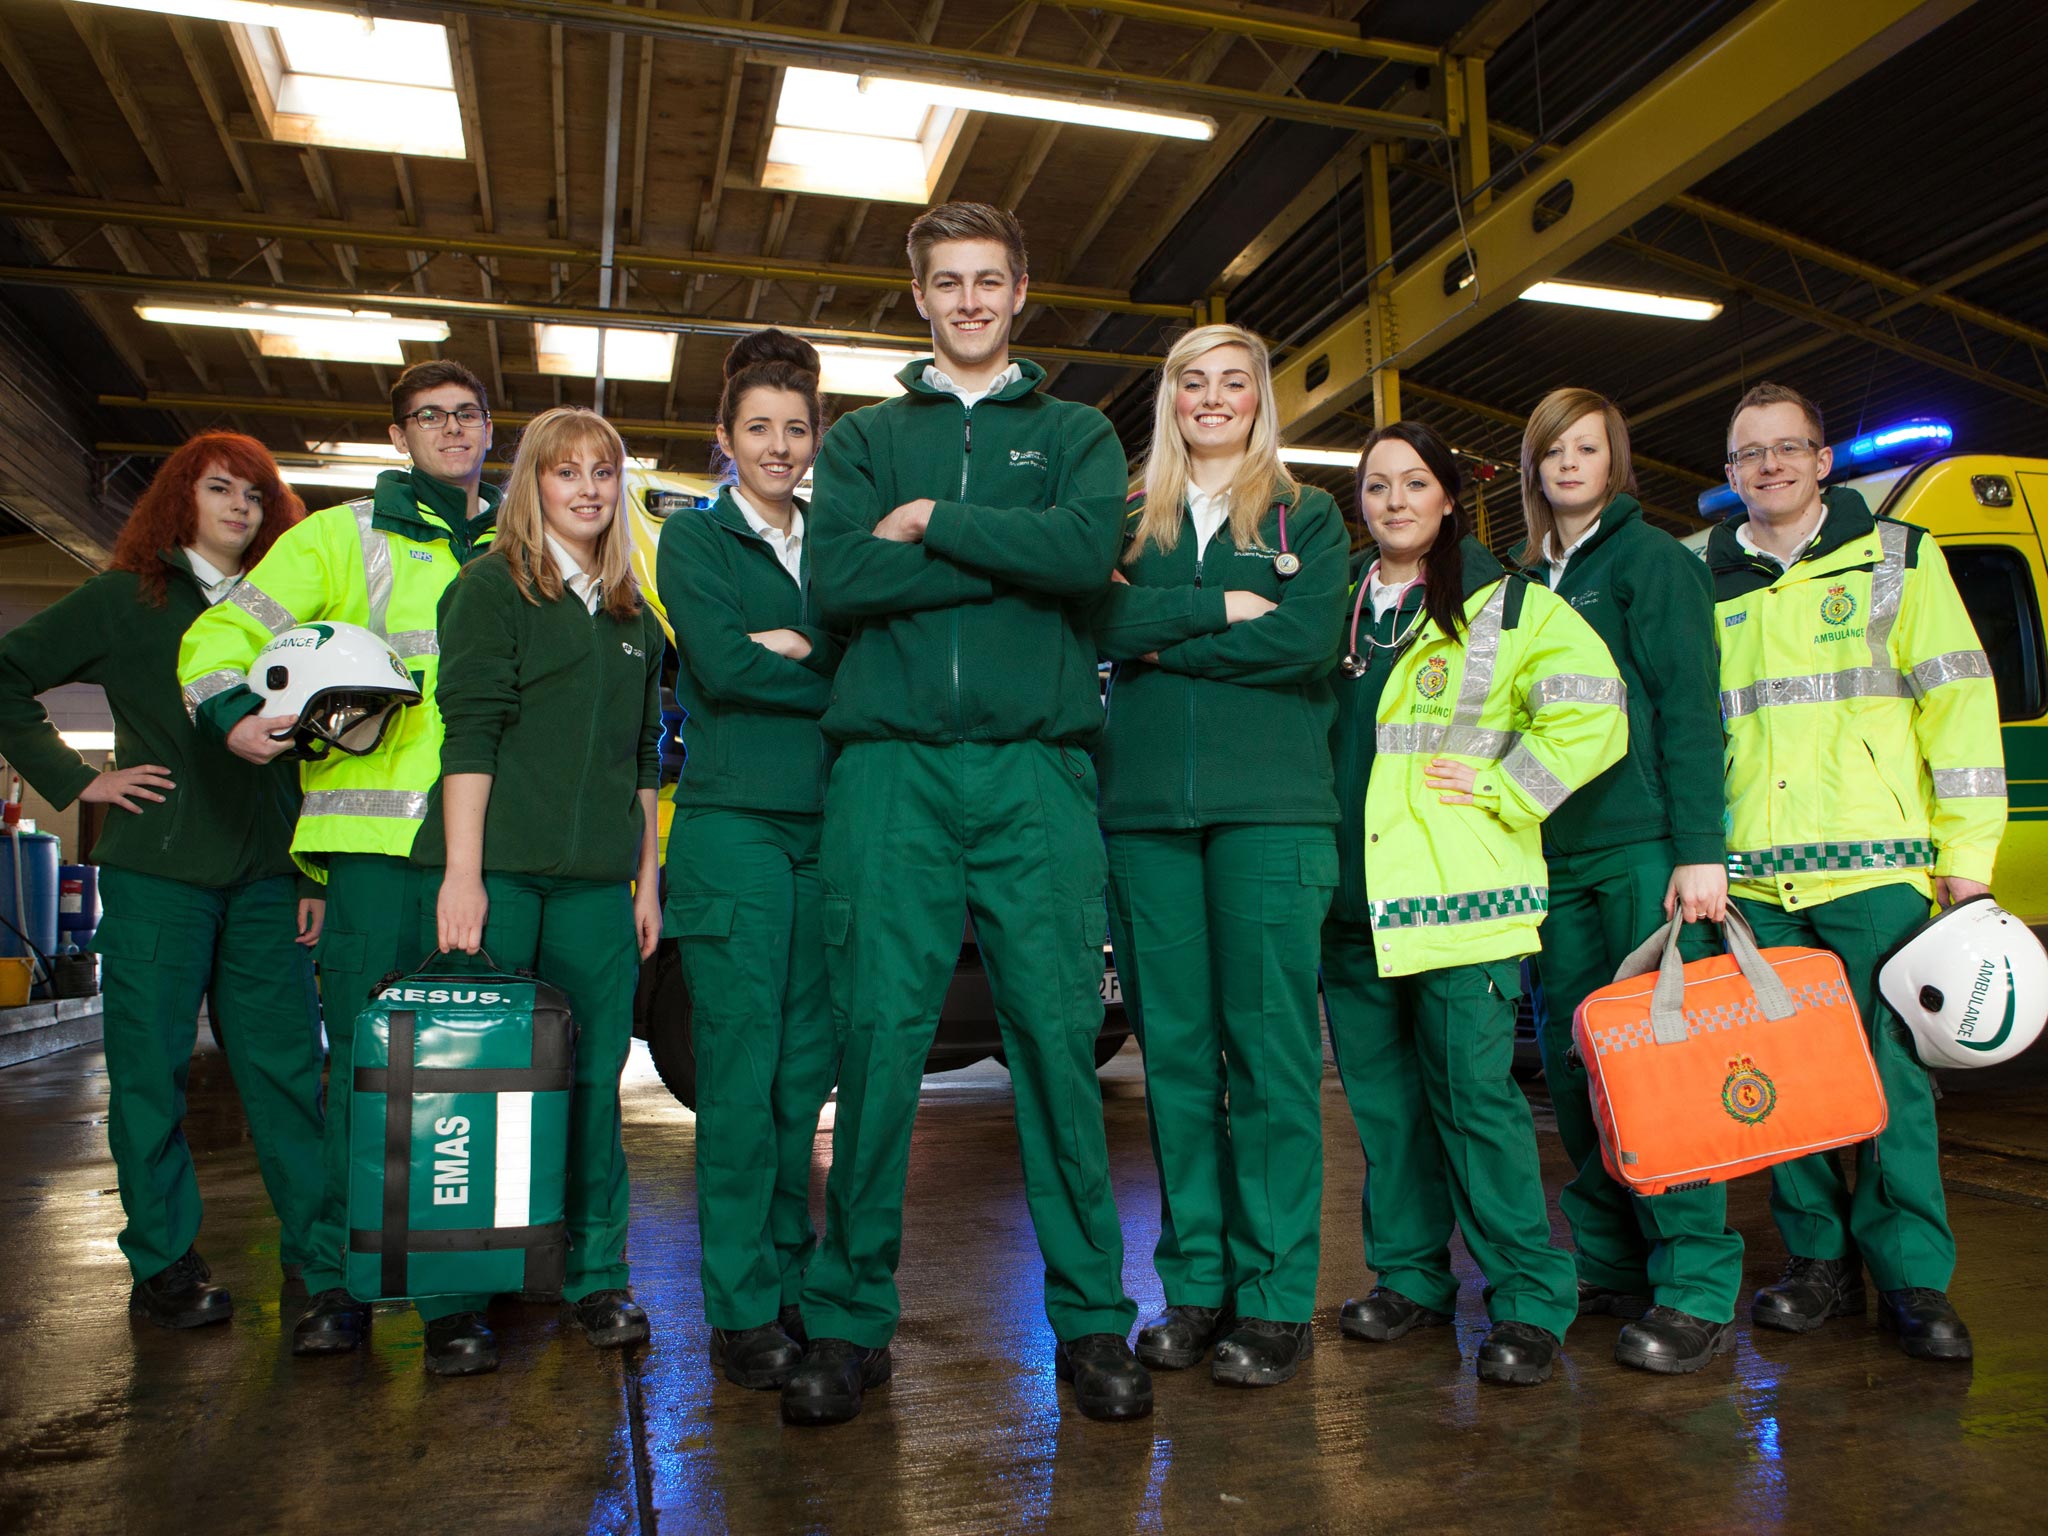 Road to recovery: the young recruits in Junior Paramedics